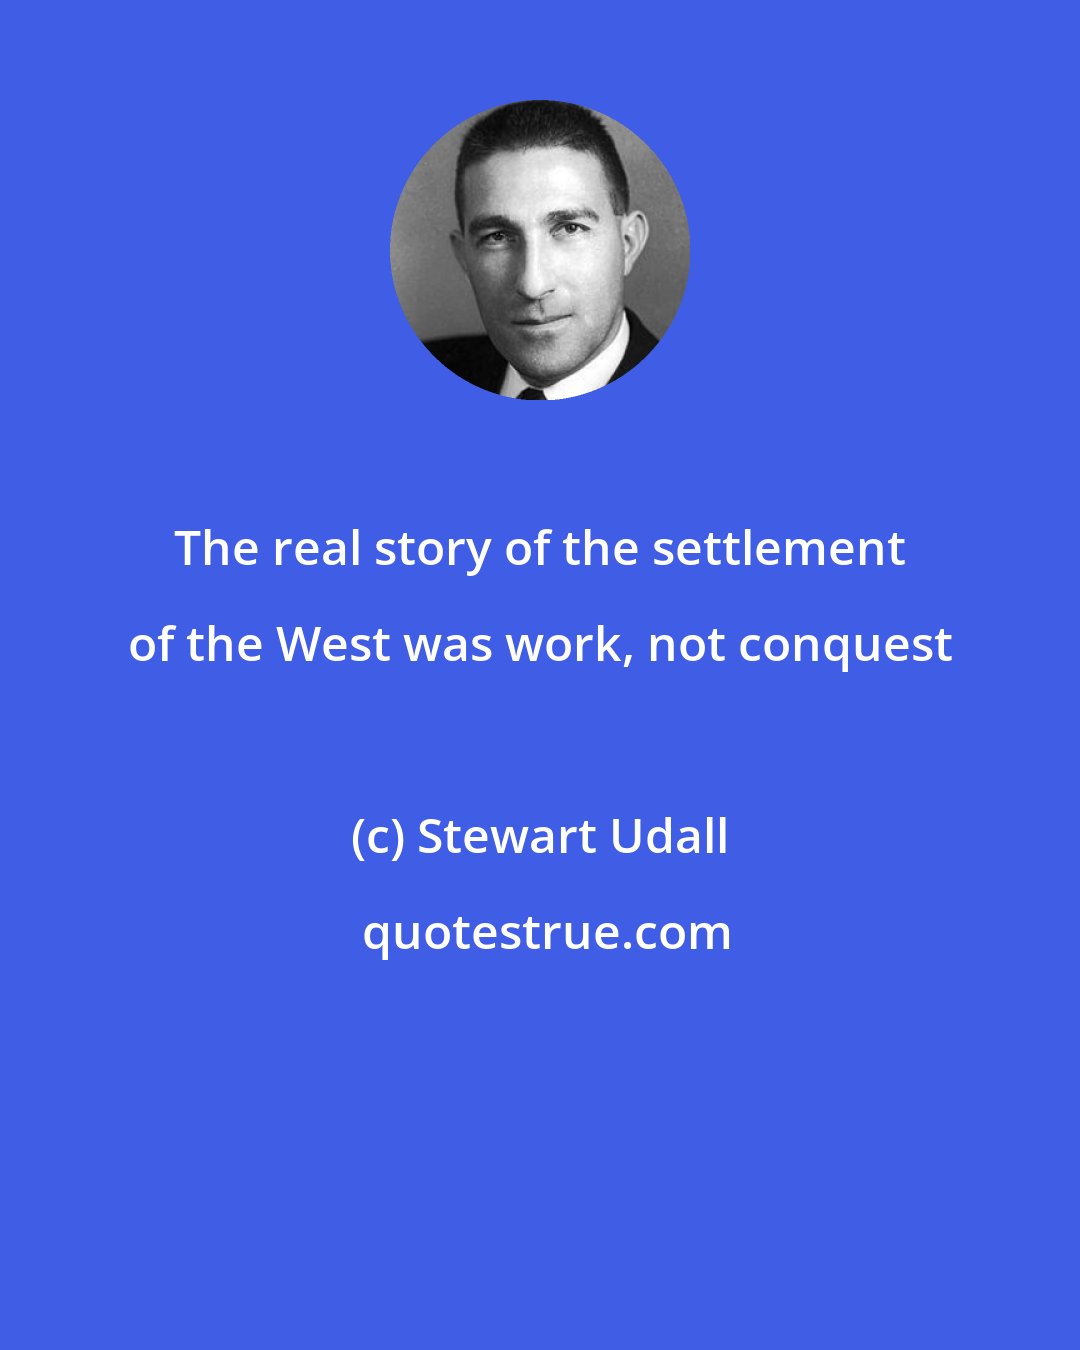 Stewart Udall: The real story of the settlement of the West was work, not conquest